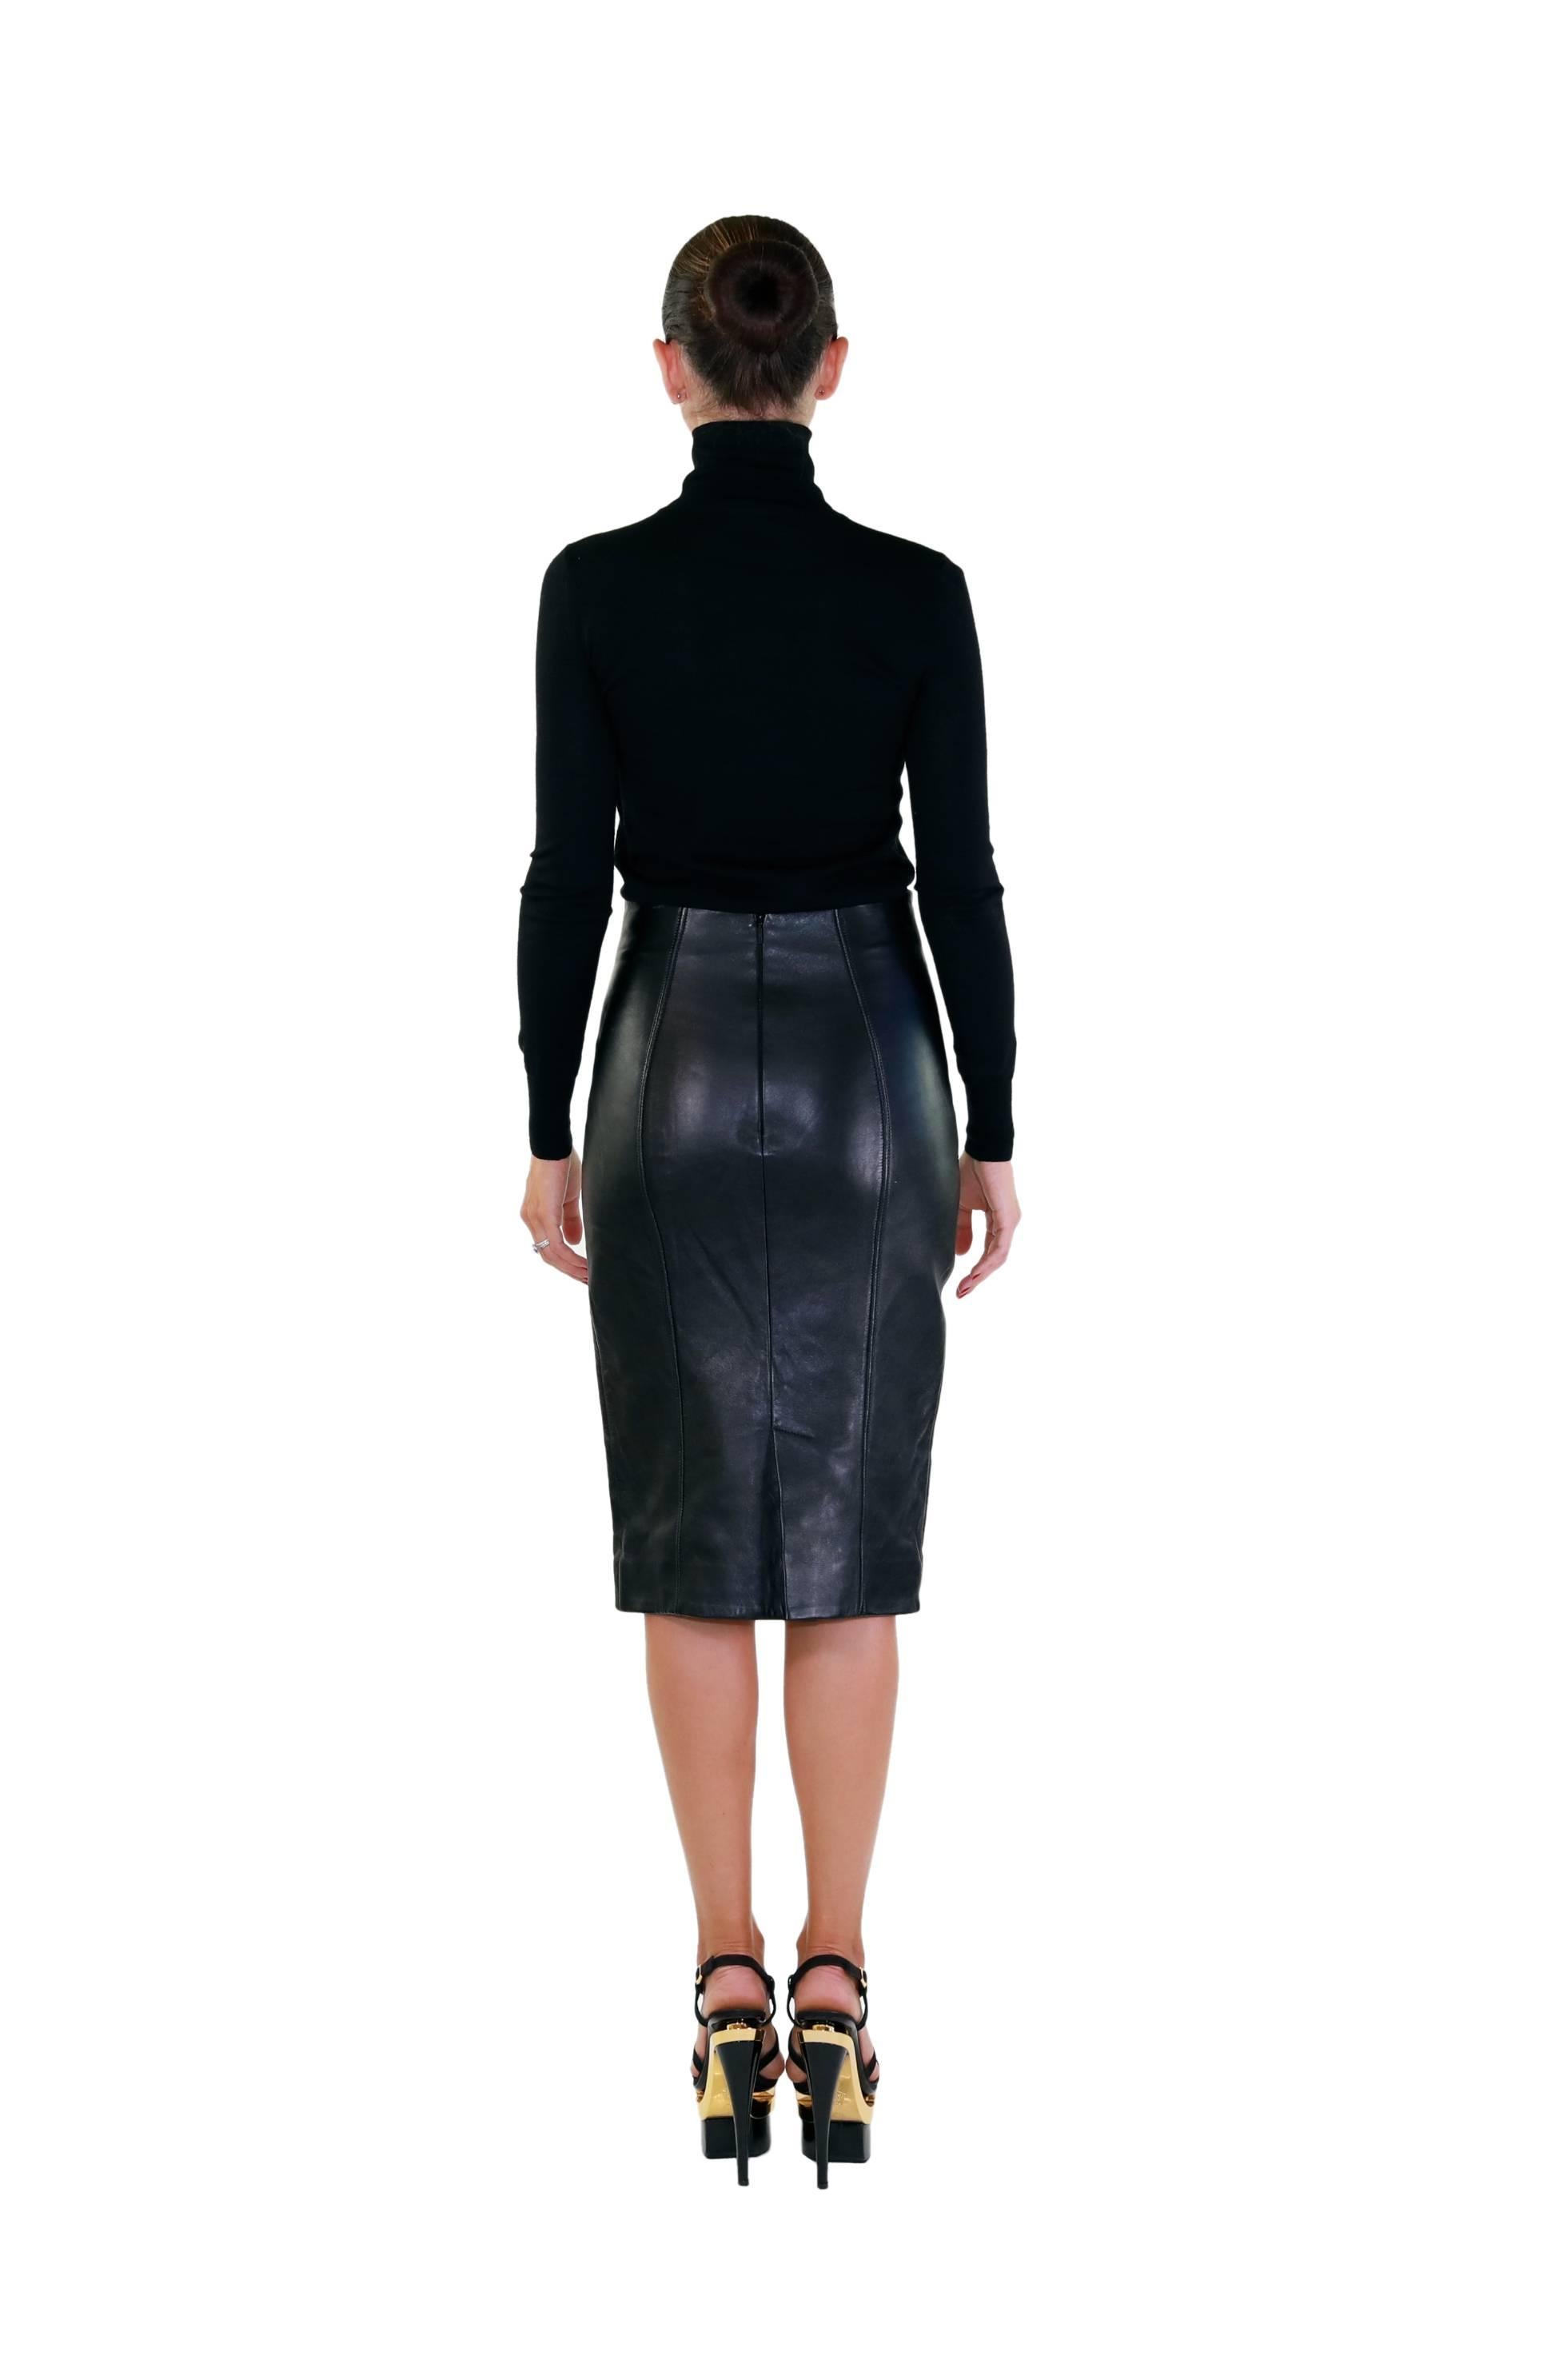 Black F/W12 LOOK#12 VERSACE GOTHIC CRYSTAL CROSS LEATHER SKIRT and WOOL TURTLENECK